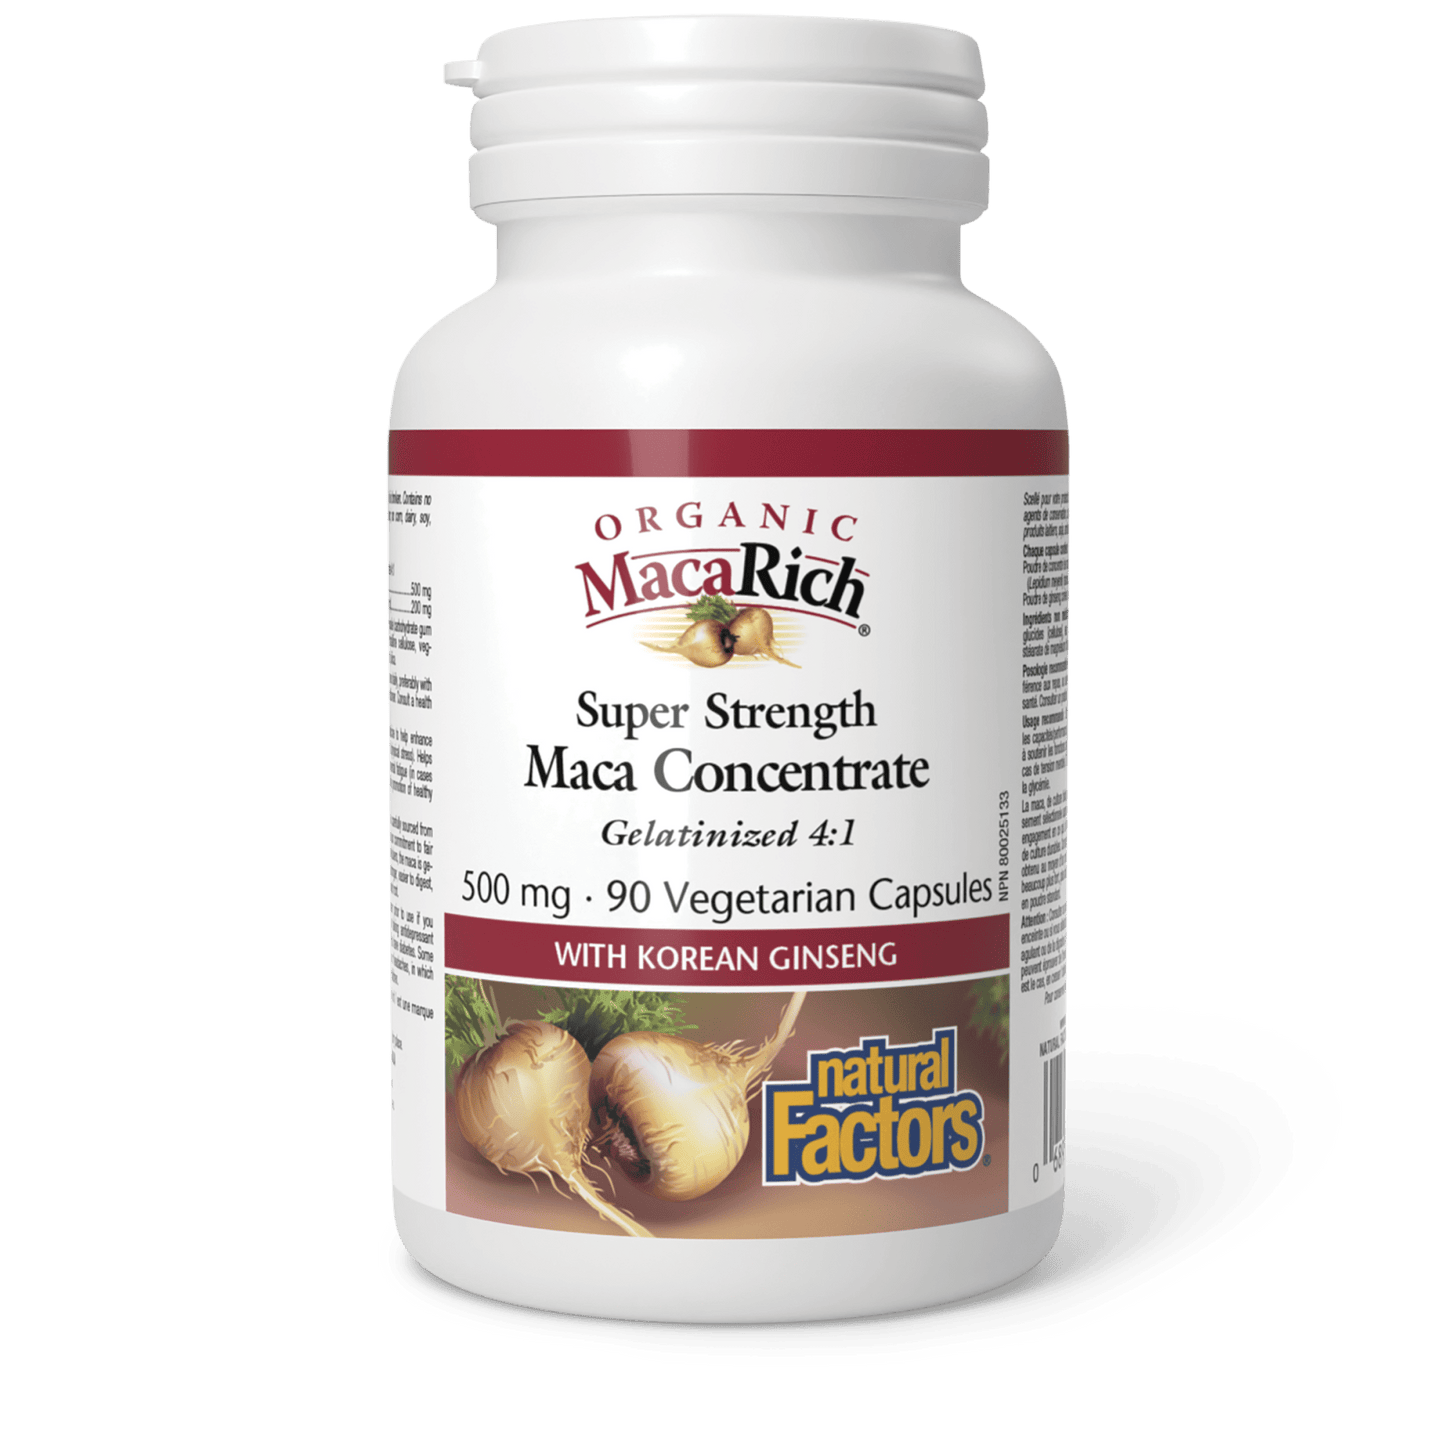 Organic MacaRich Super Strength Maca Concentrate 500 mg, Natural Factors|v|image|4537